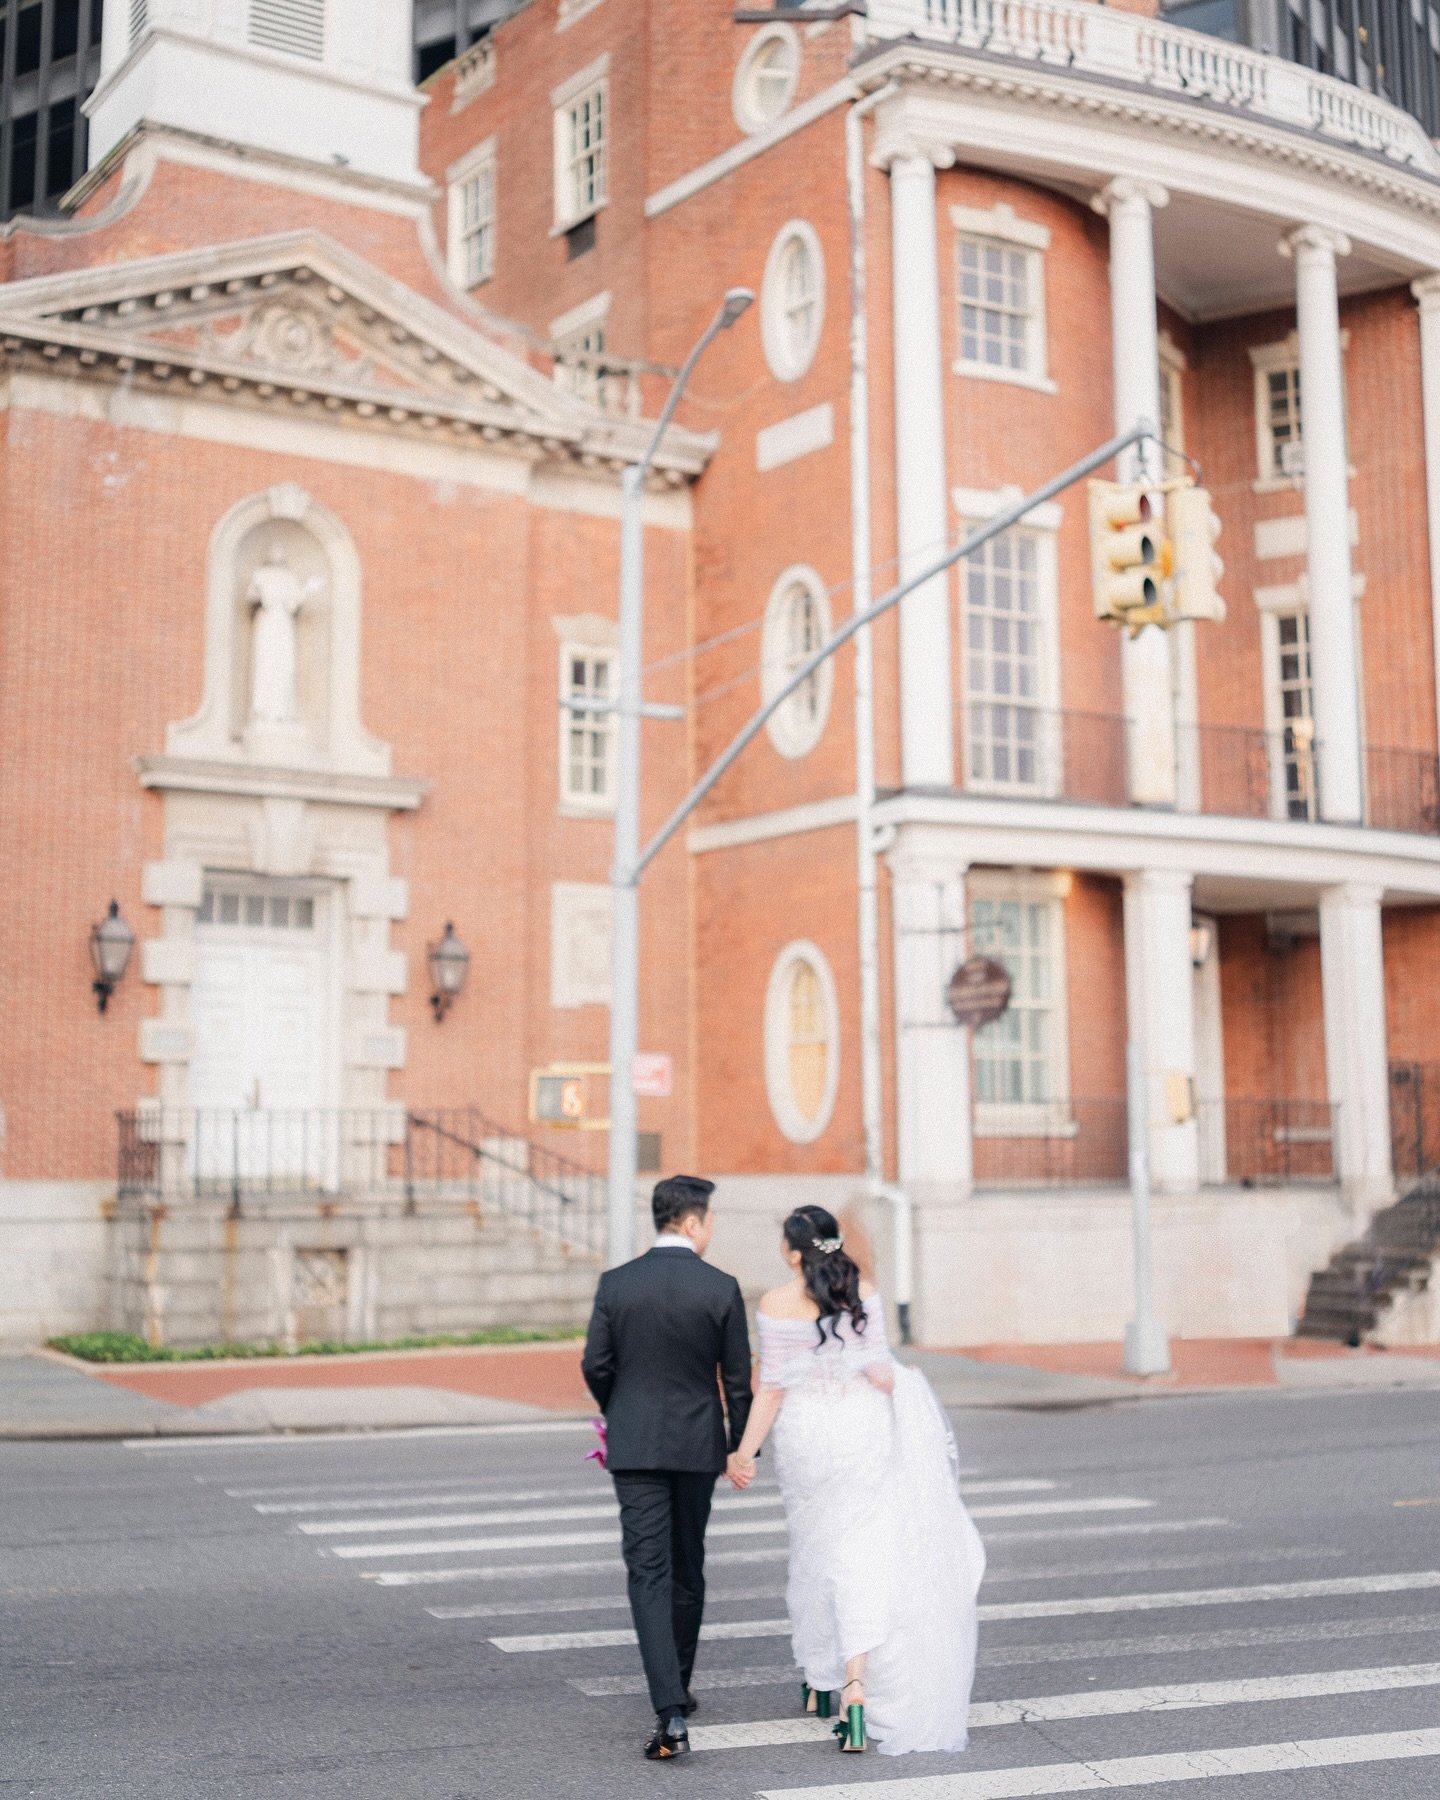 crossing into forever with the love of your life &gt;

#nycadventures #justmarried #nycbride #nycweddingplanner #newyorkweddingplanner #nyweddingplanner #socalweddingplanner #austinweddingplanner #atxweddingplanner #happinesscaptured #newyorkwedding 